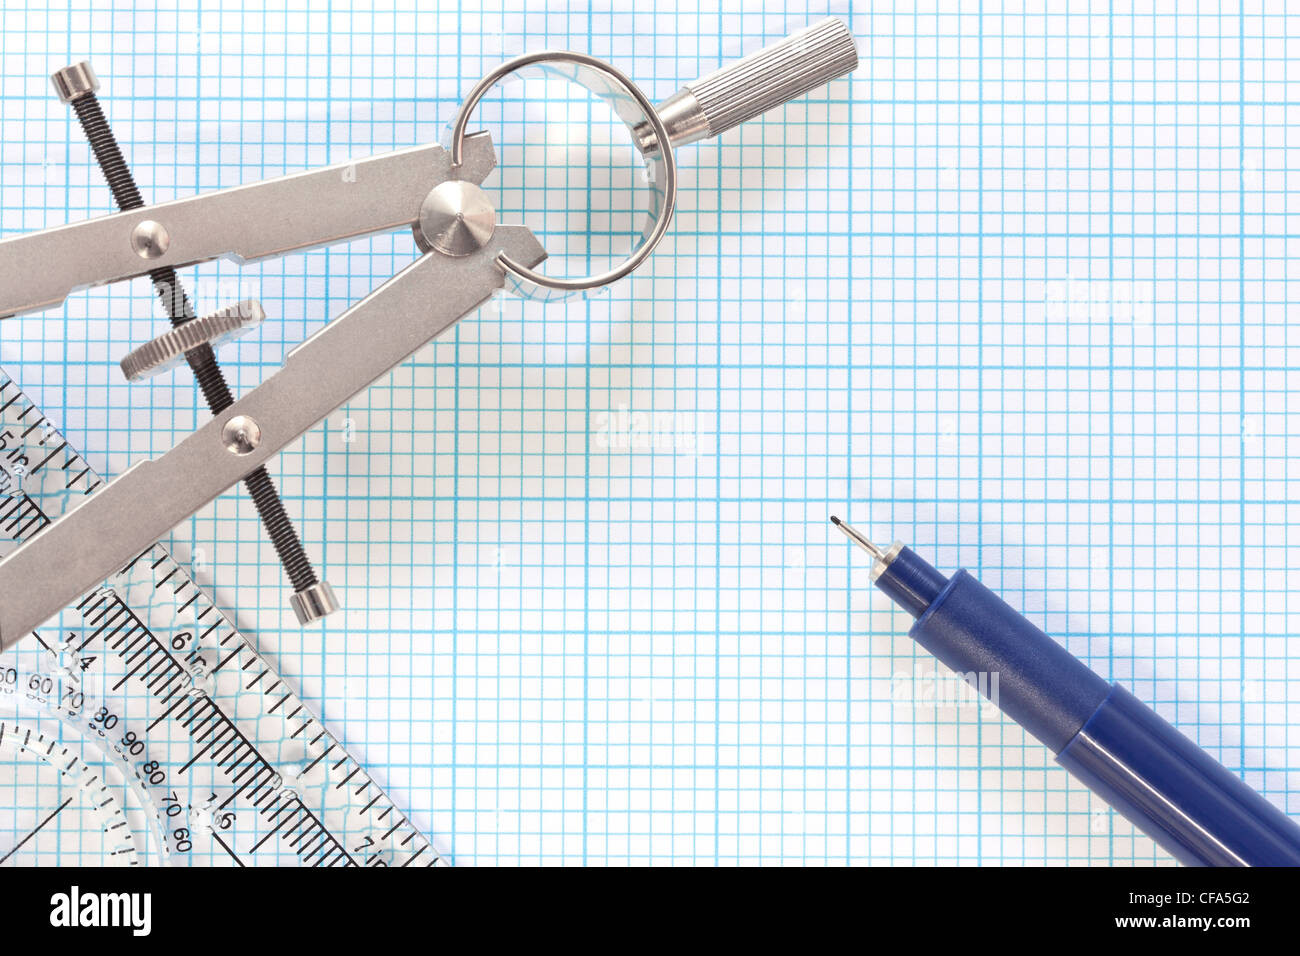 Still life photo of engineering graph paper with a fine 0.1mm pen, compass and ruler Stock Photo